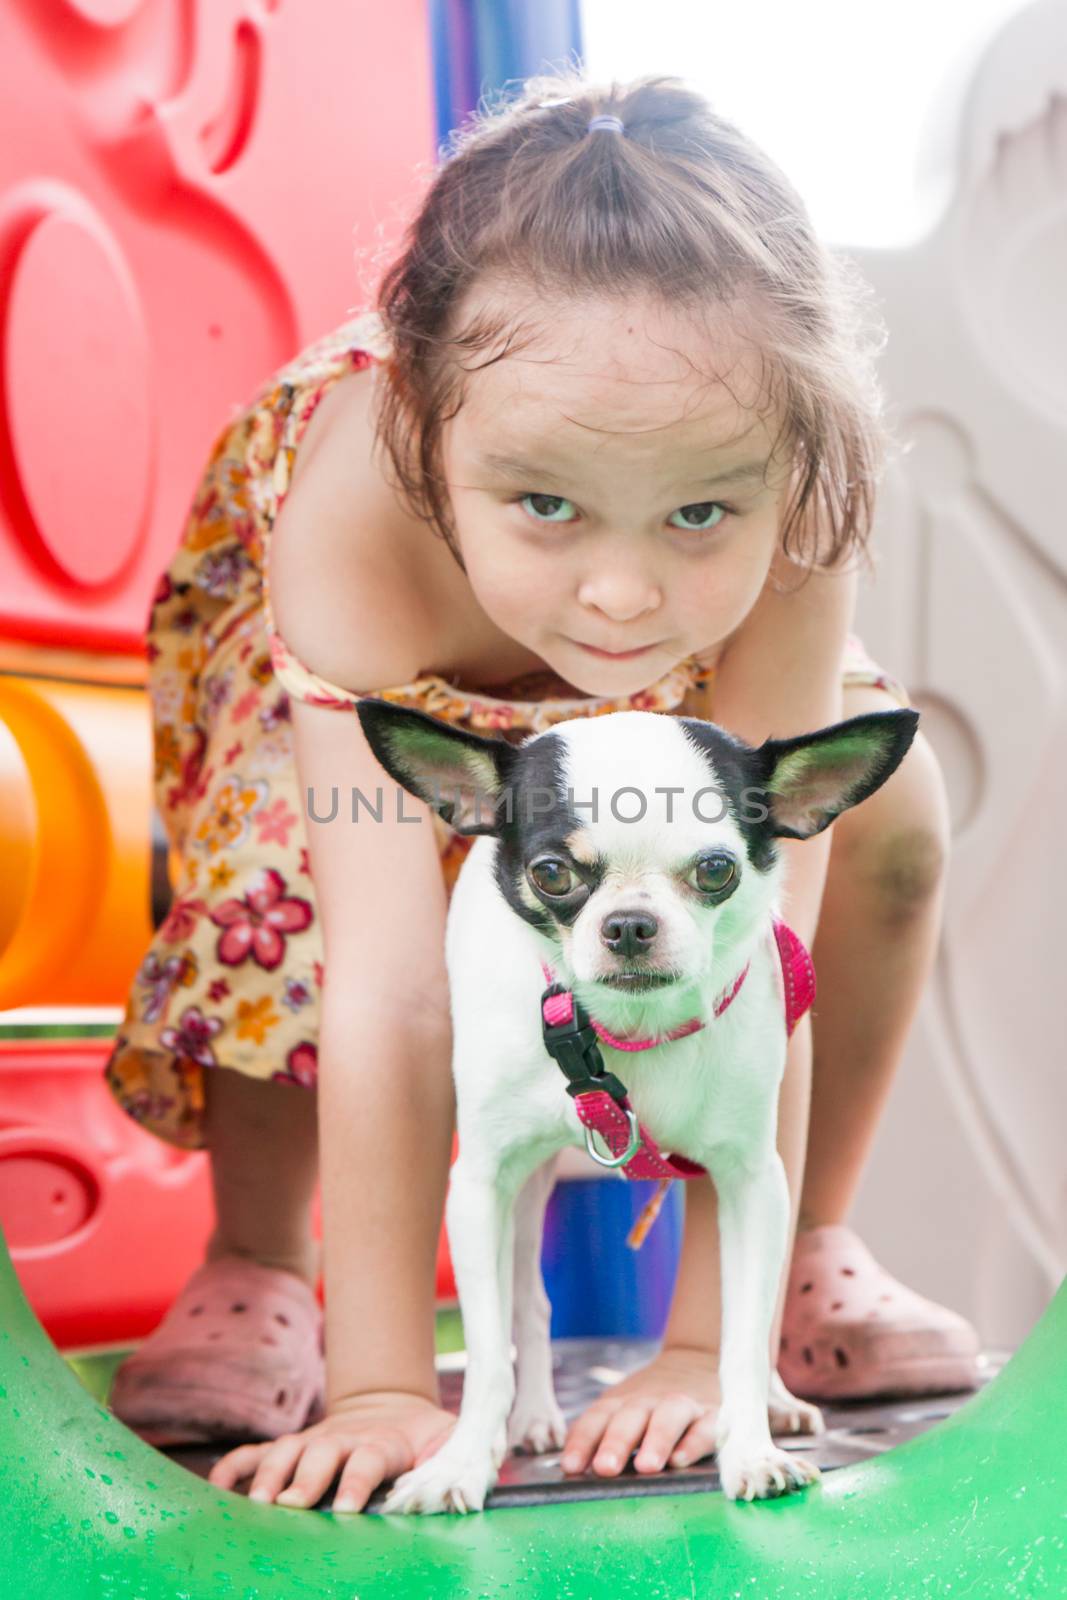 Young girl and puppy at playground by imagesbykenny